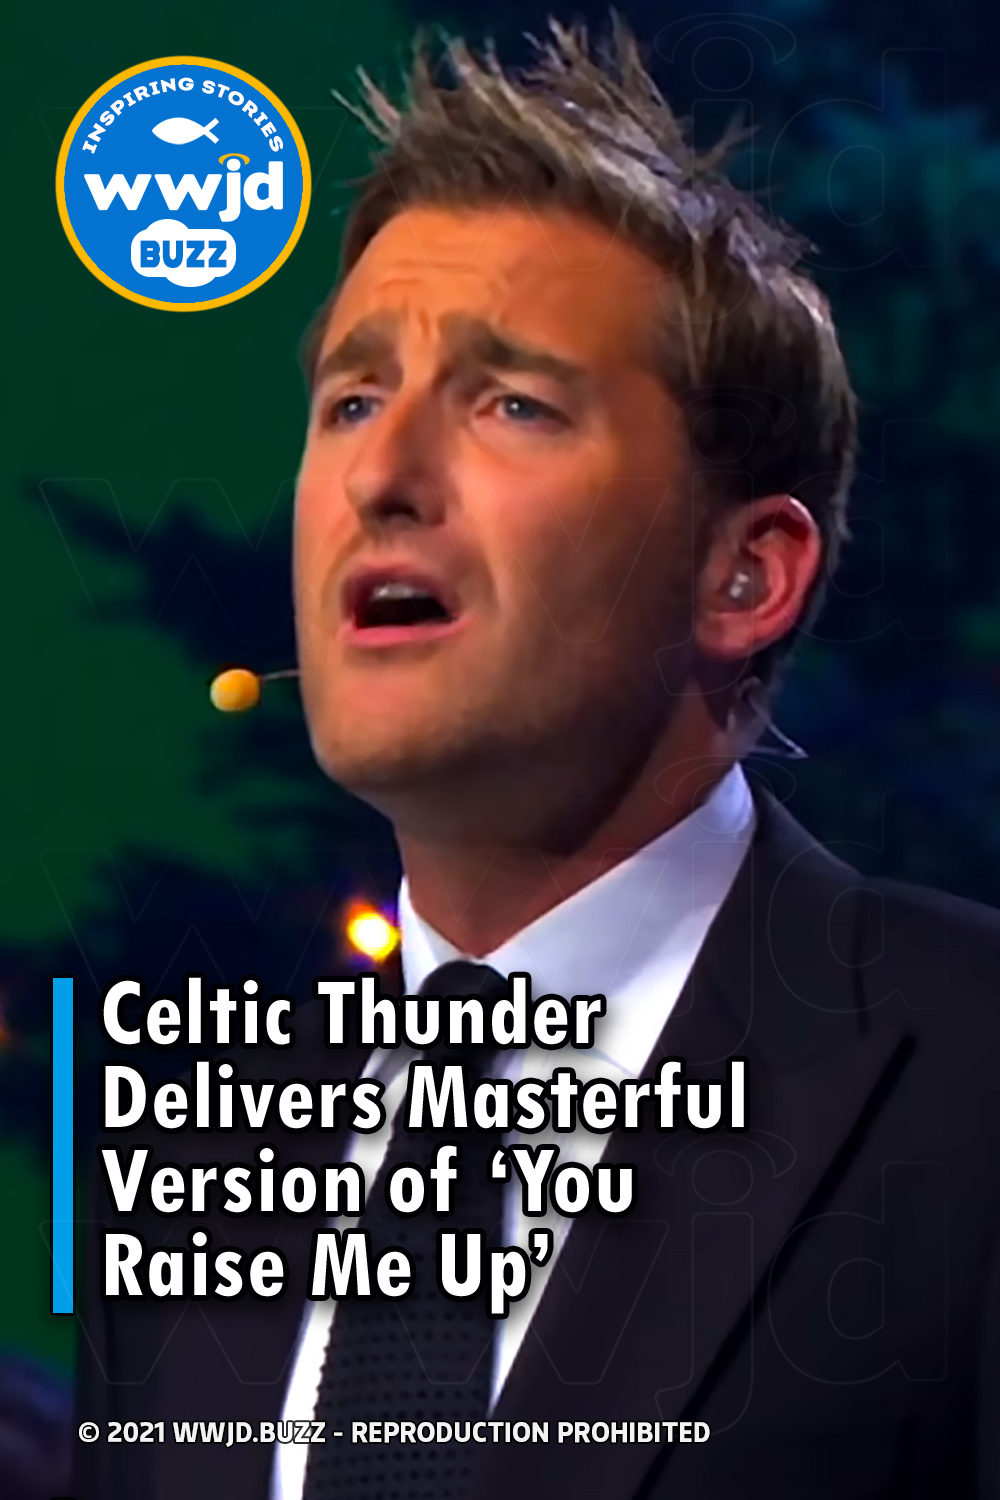 Celtic Thunder Delivers Masterful Version of ‘You Raise Me Up’